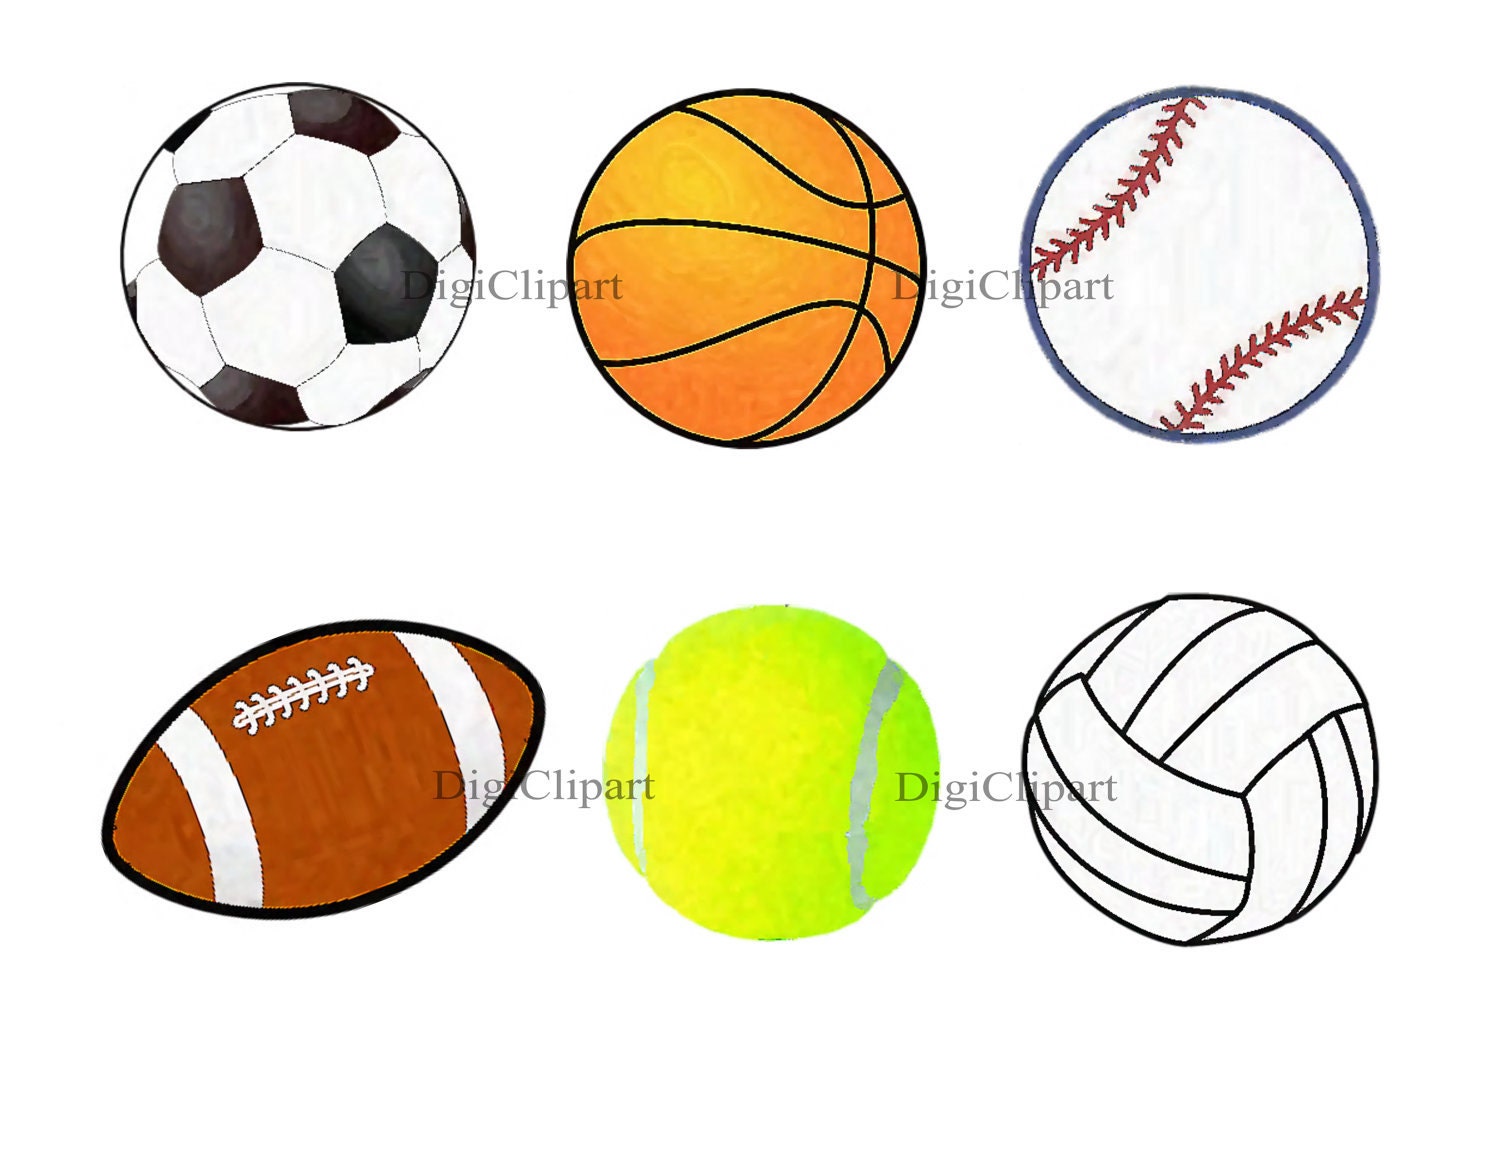 free clipart of sports balls - photo #12